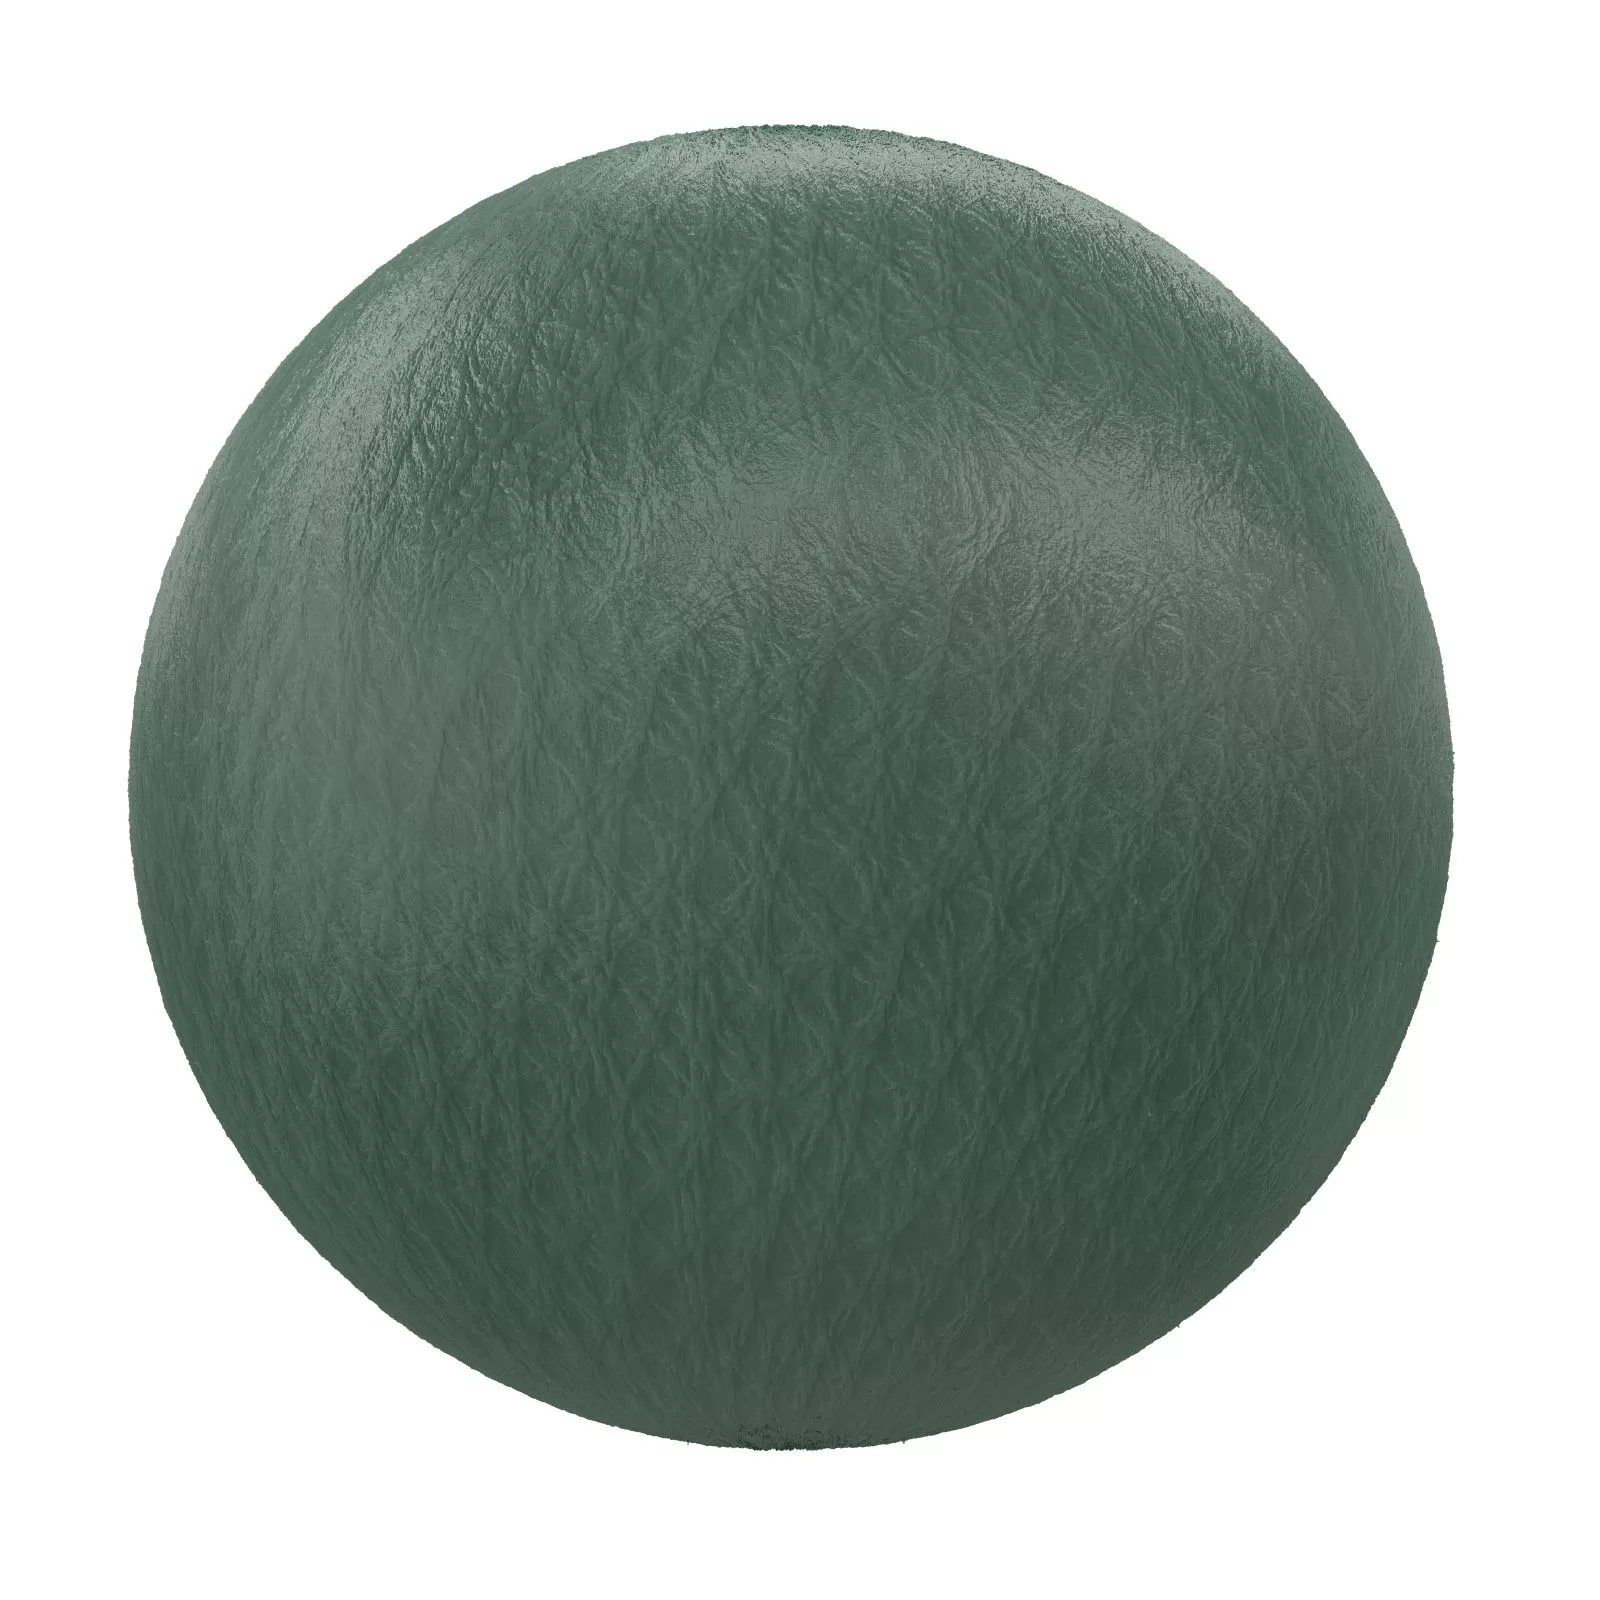 PBR CGAXIS TEXTURES – LEATHER – Green Leather 2